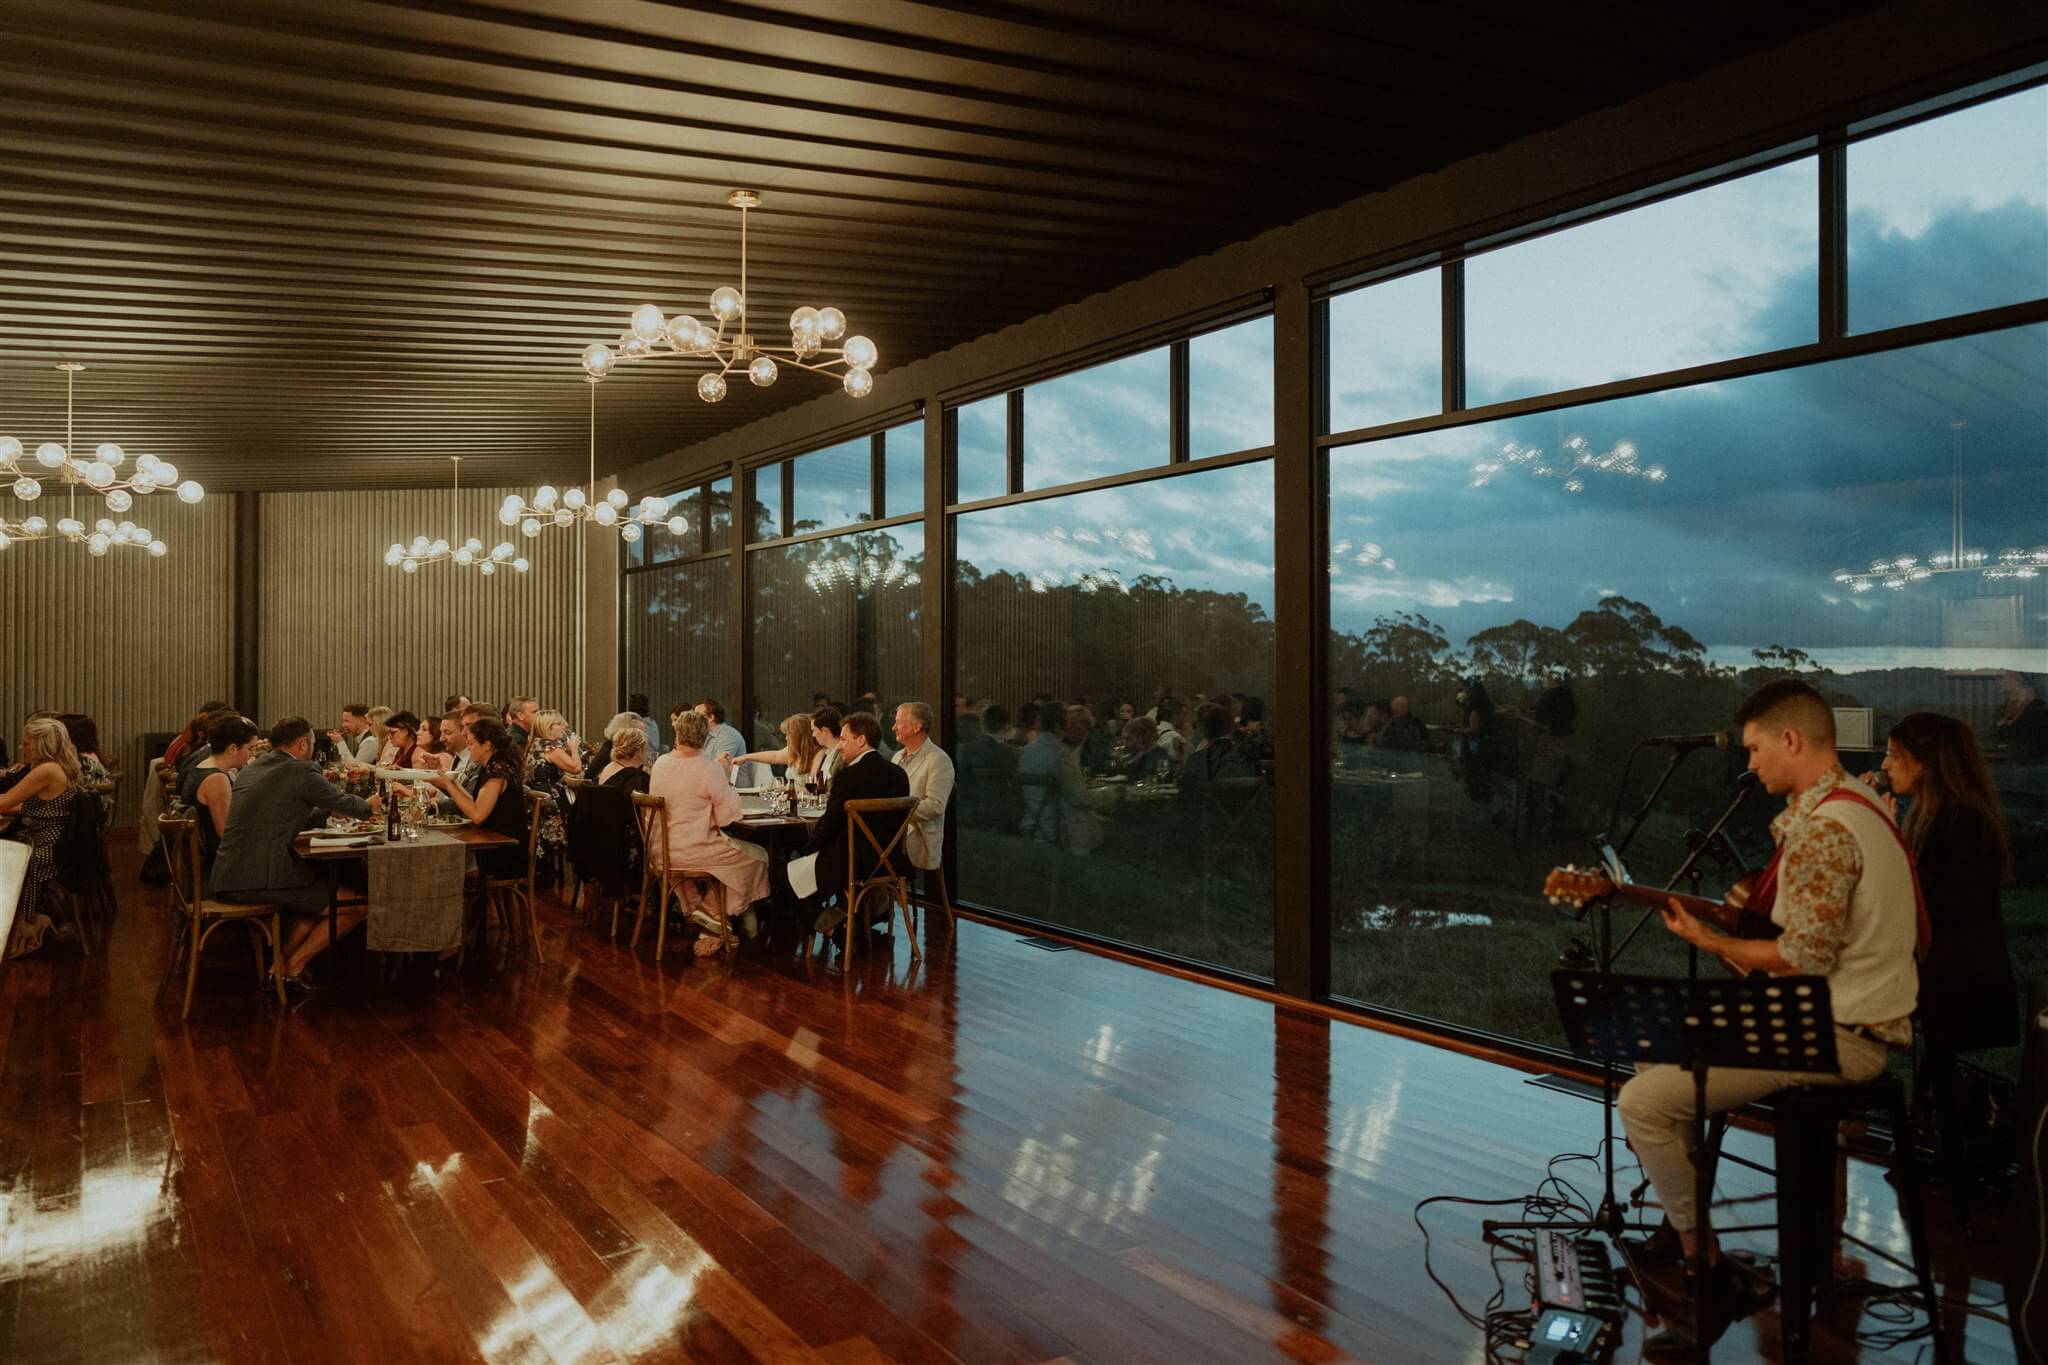 An intimate indoor wedding venue with a rustic charm featuring guests dining under elegant globe chandeliers, as a musician plays guitar near large windows showcasing a dusky sky